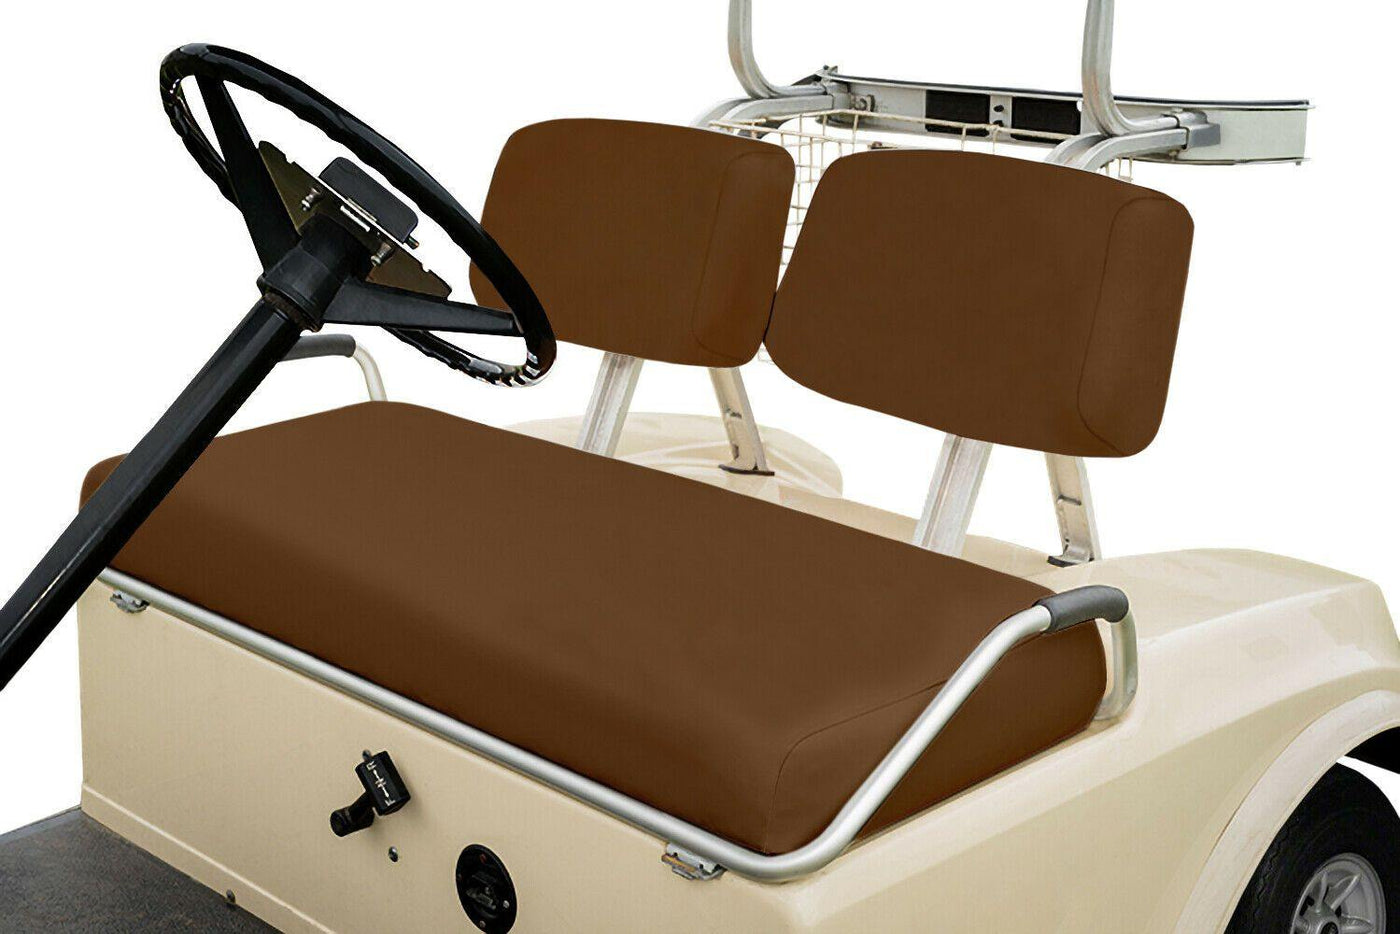 Club Car DS Pre 2000 Golf Cart Replacement Wood Seating 